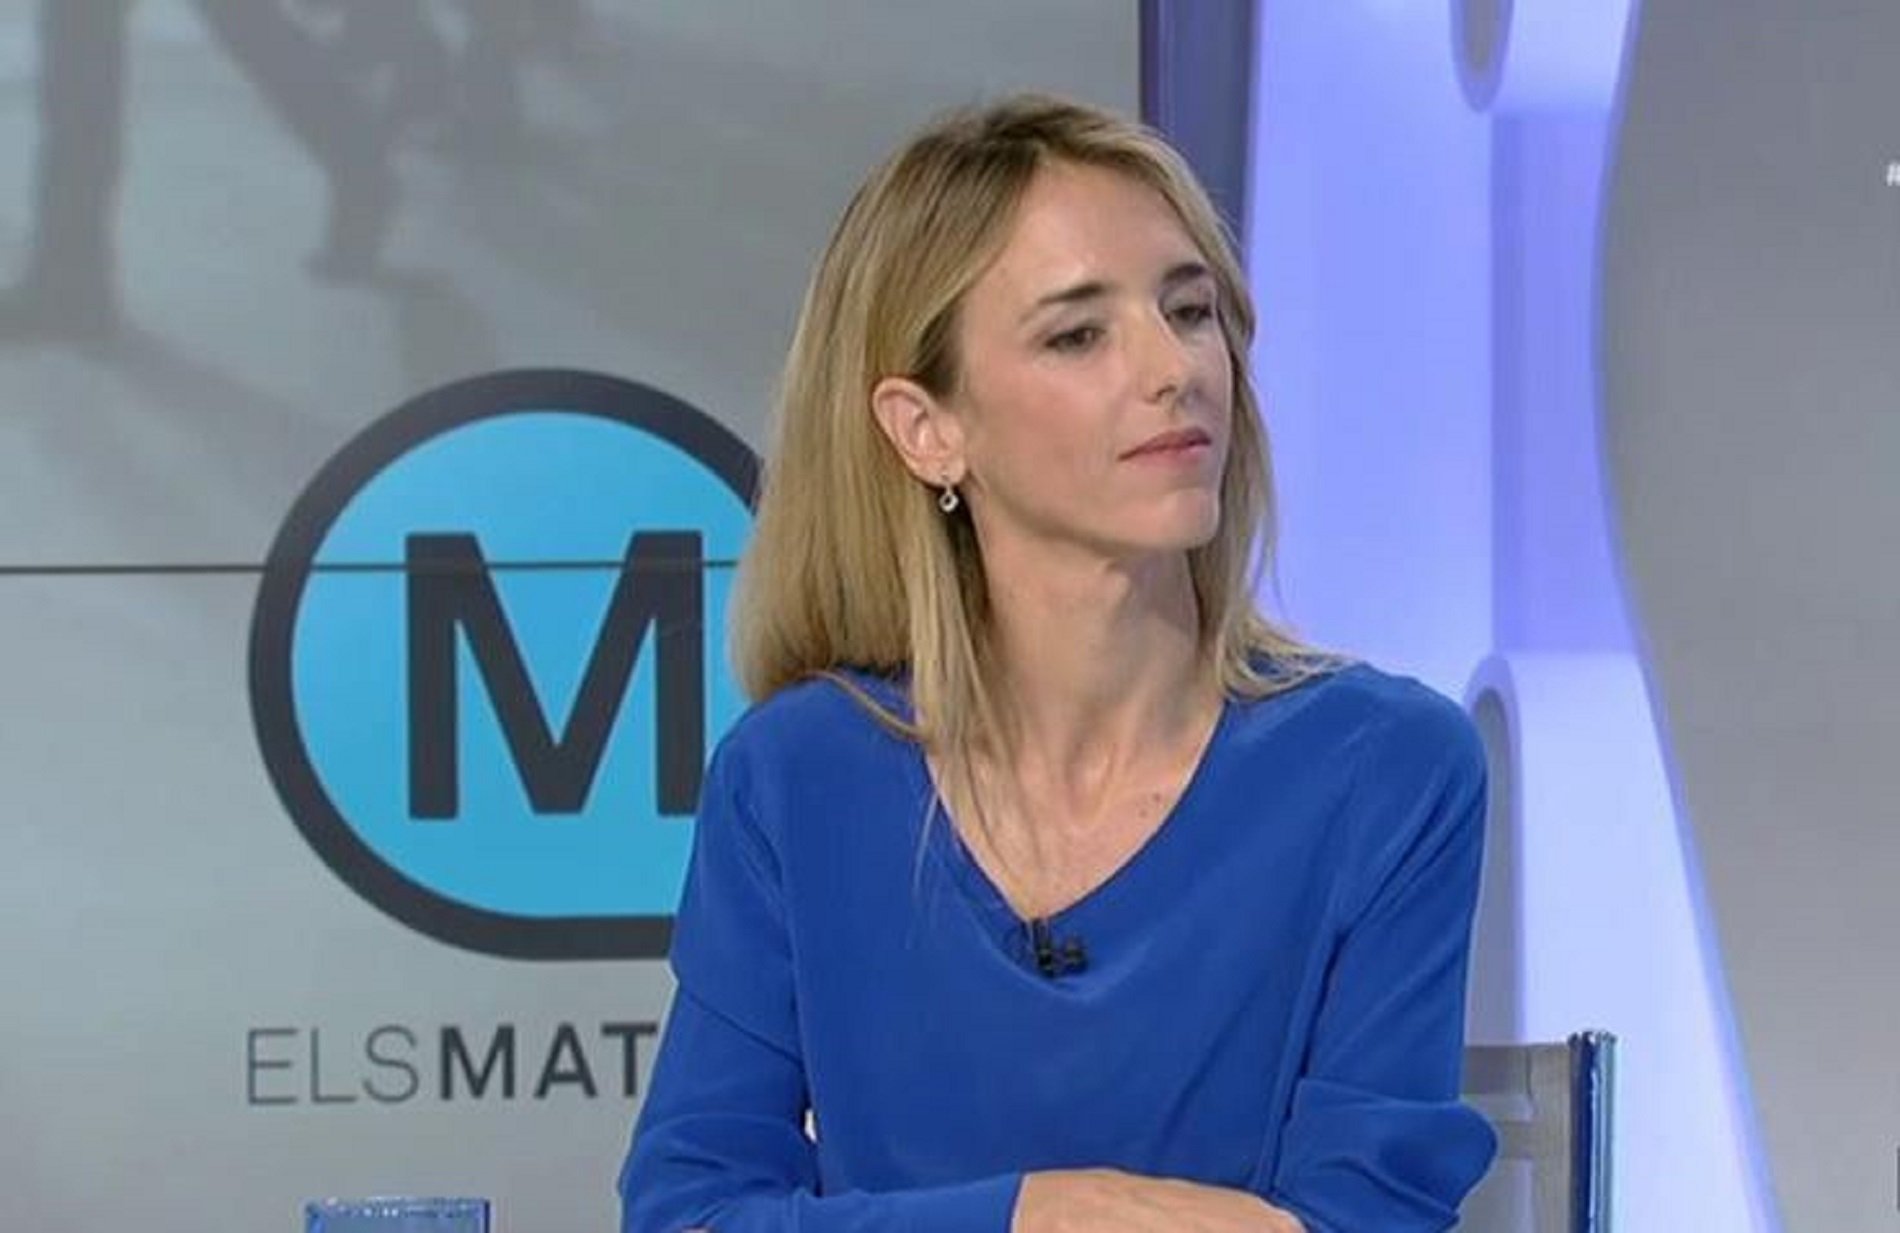 Leading PP candidate tells Catalan public broadcaster it took part in "coup against democracy"